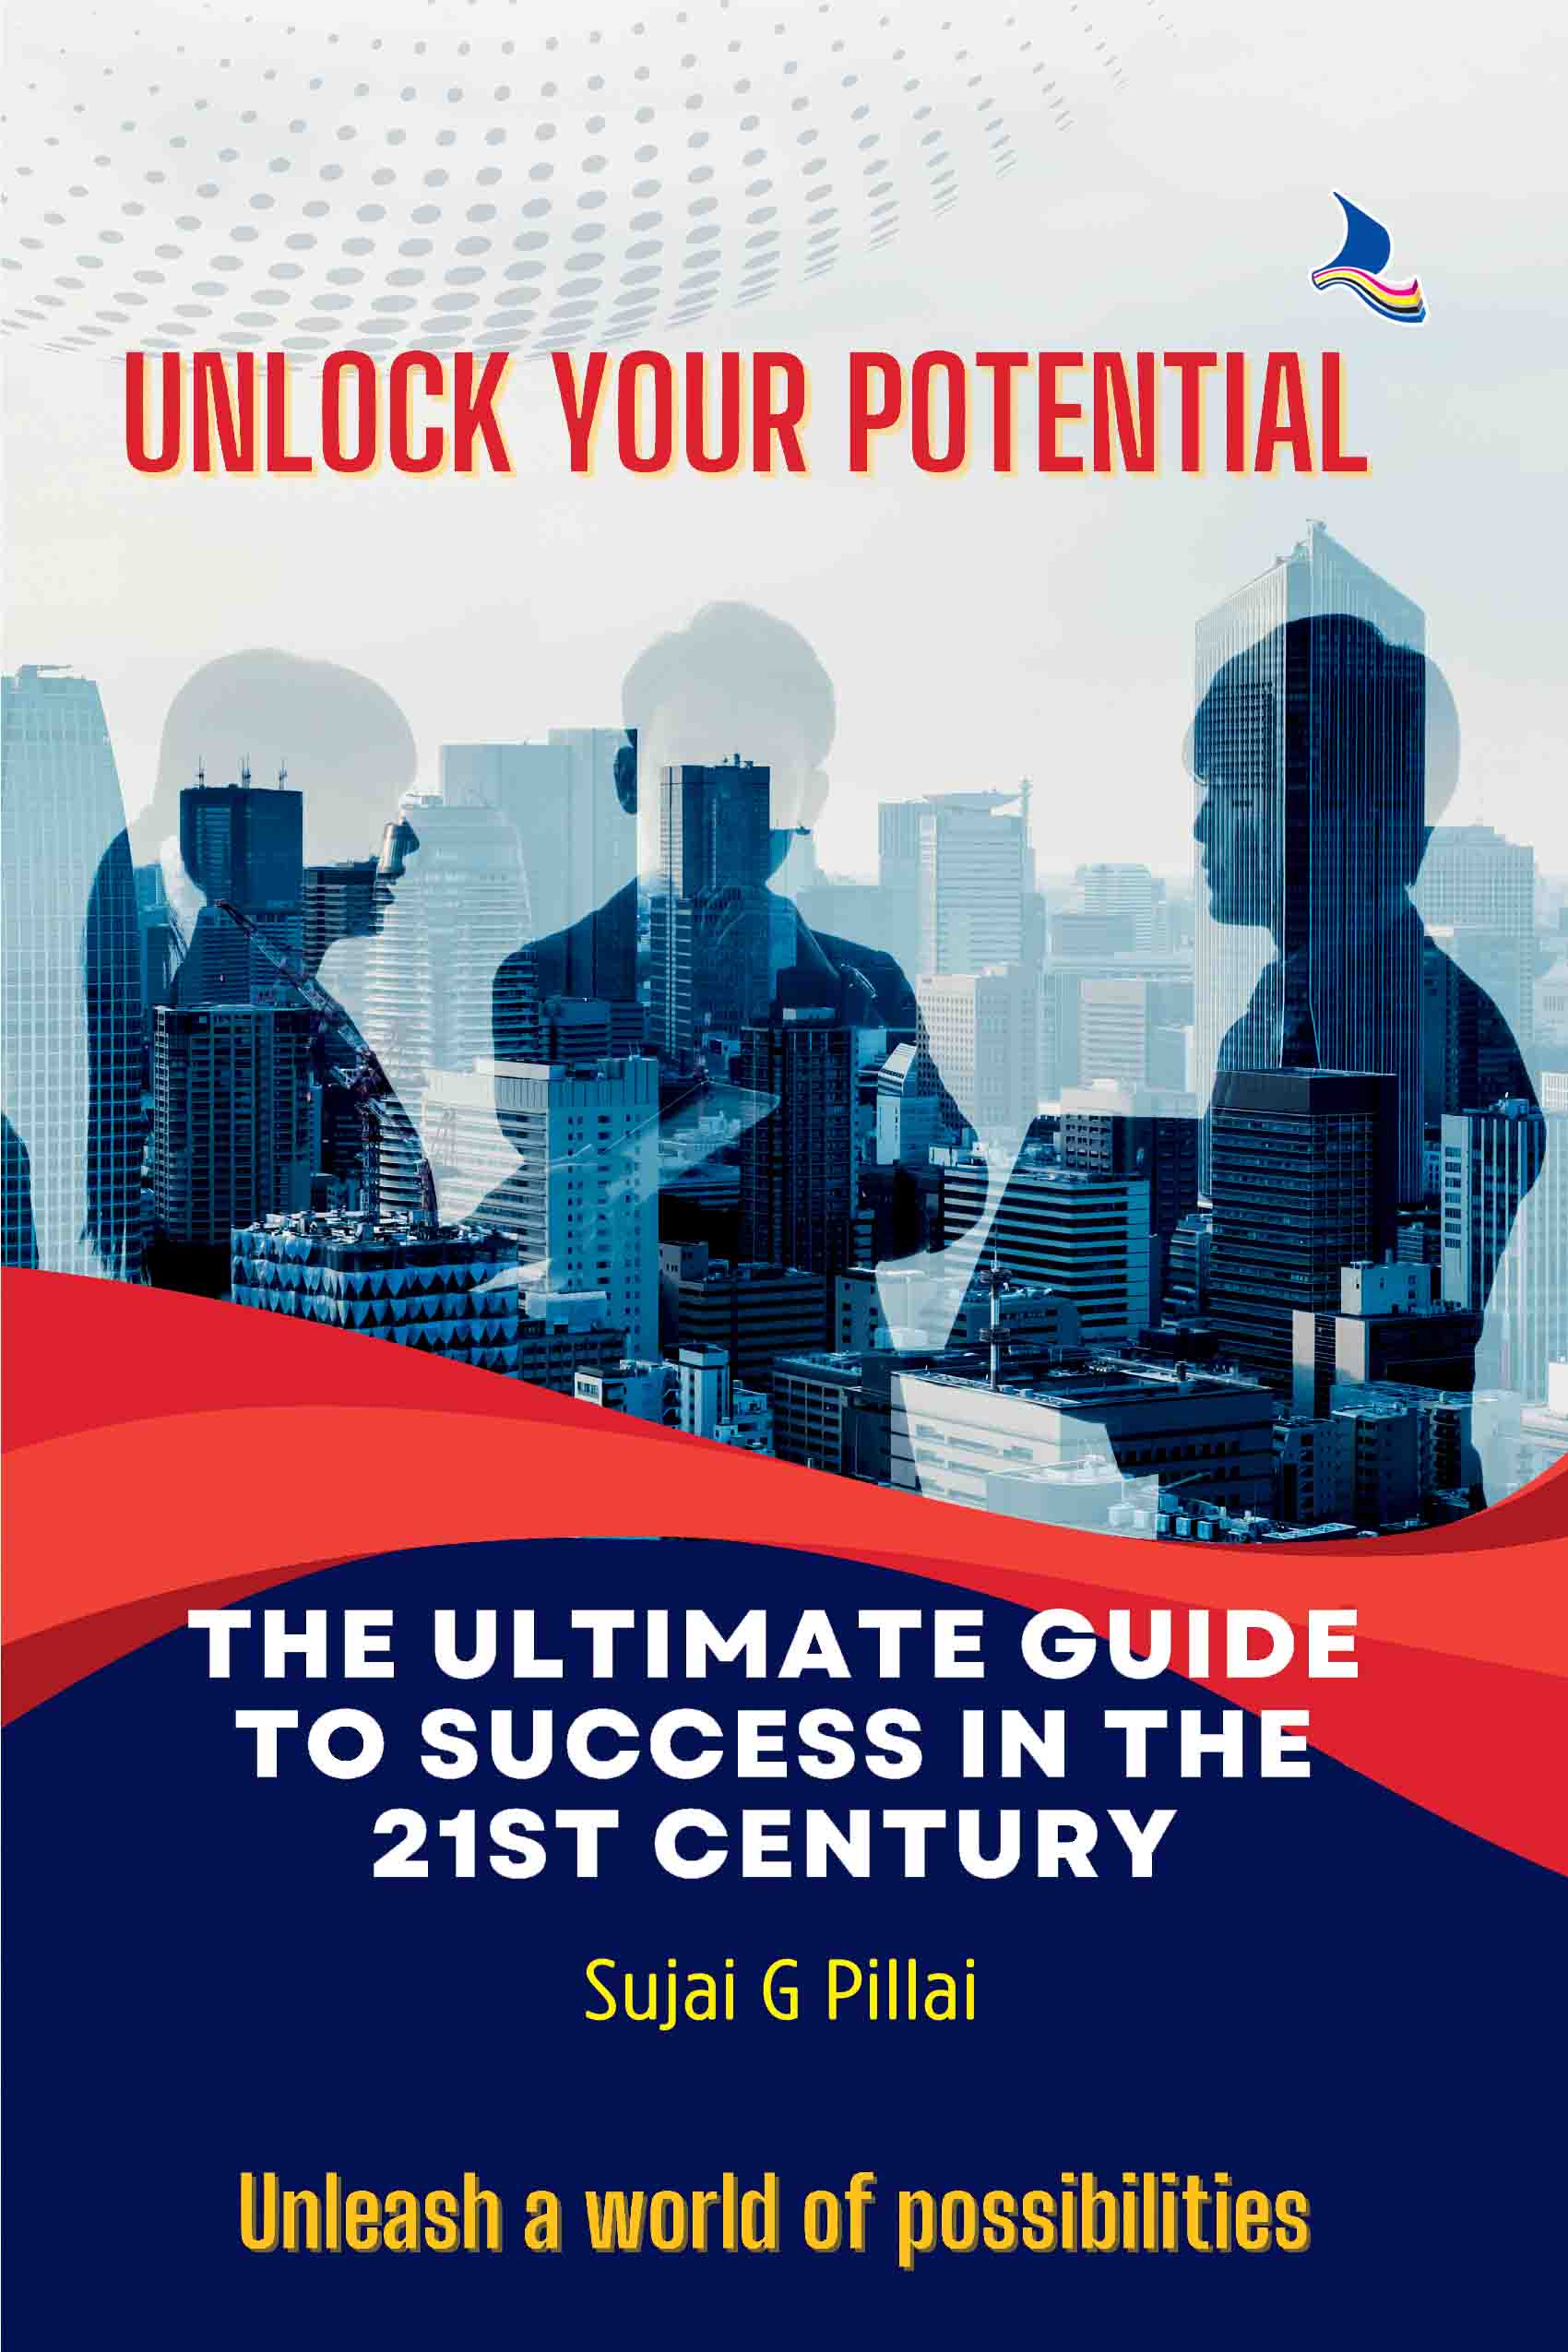 Unlock Your Potential: The Ultimate Guide to Success in the 21st Century